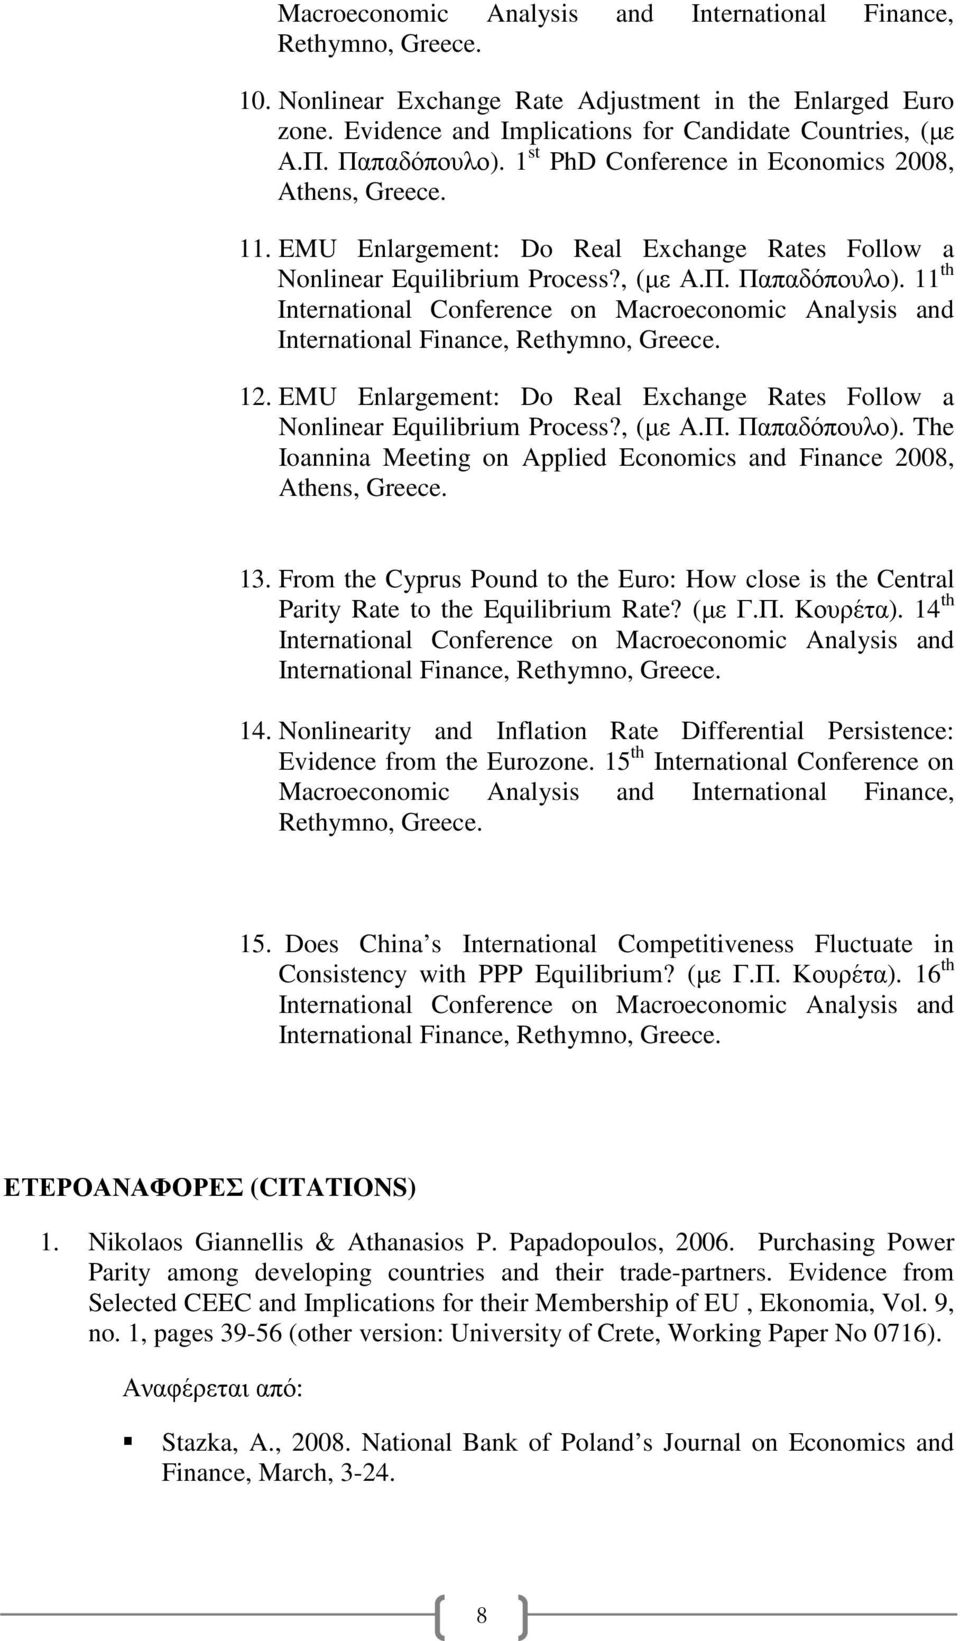 11 th International Conference on Macroeconomic Analysis and International Finance, Rethymno, Greece. 12. EMU Enlargement: Do Real Exchange Rates Follow a Nonlinear Equilibrium Process?, (µε Α.Π.